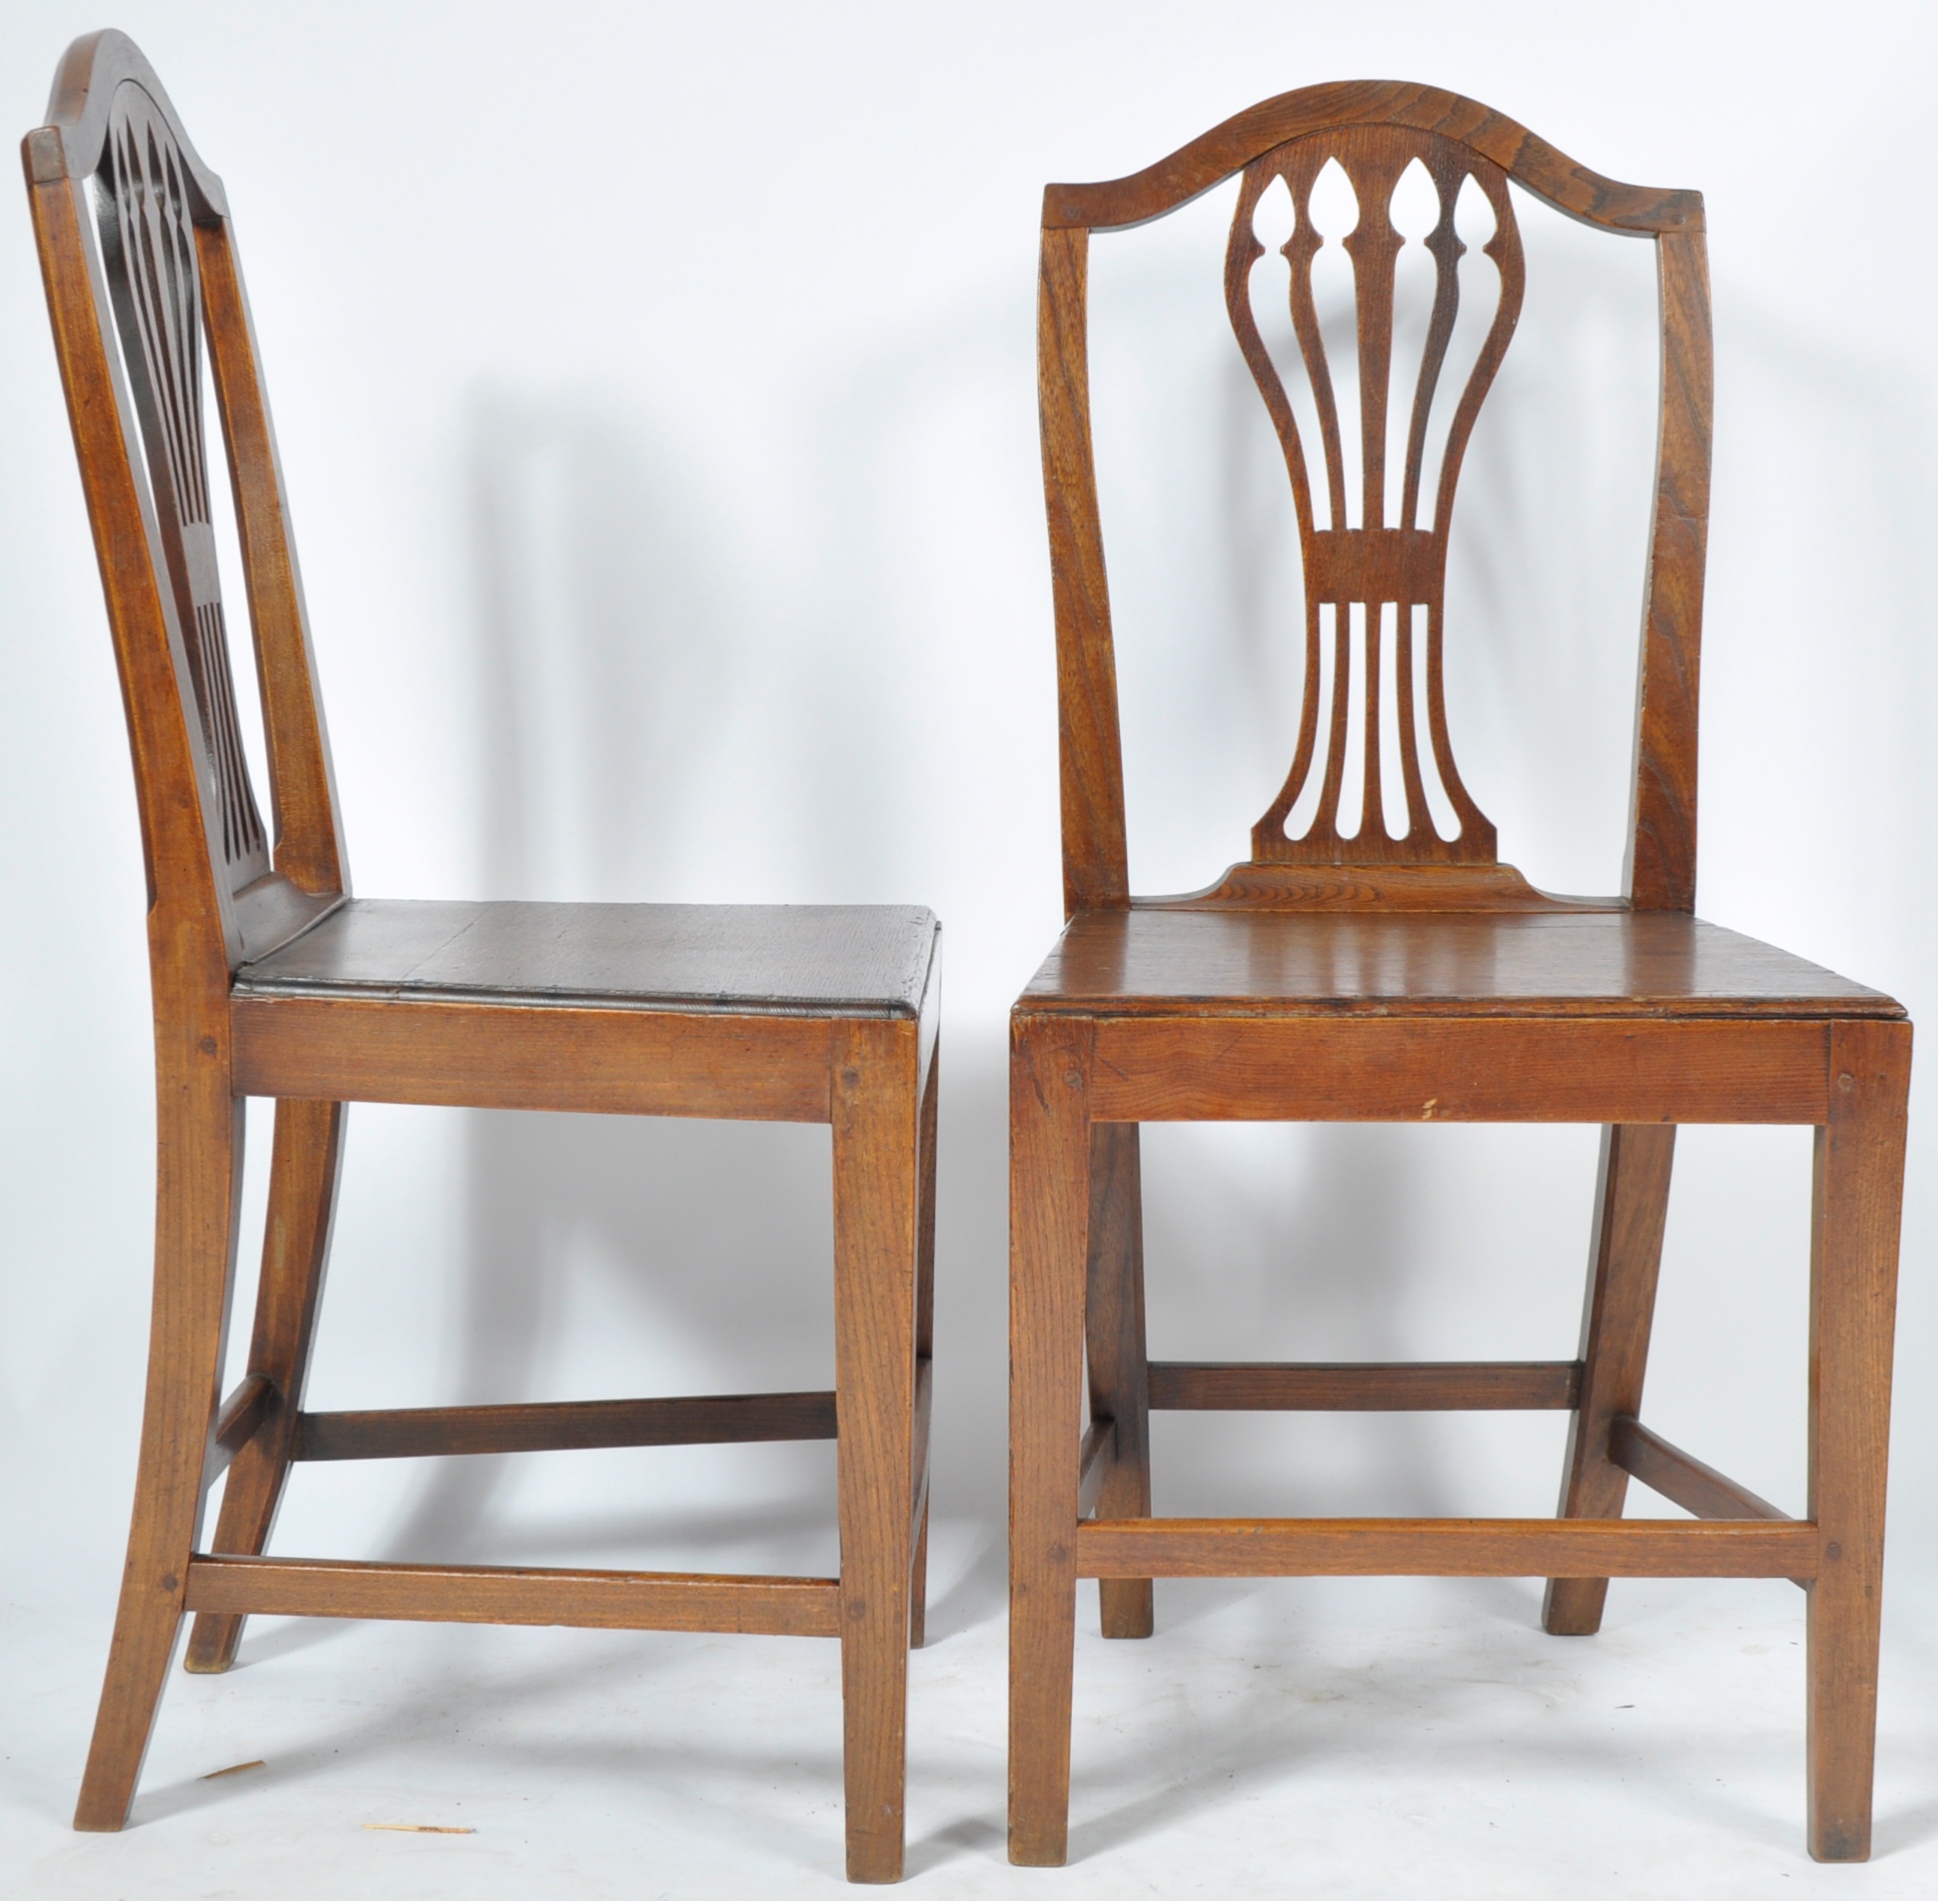 SET OF SIX 18TH CENTURY CHIPPENDALE STYLE OAK & ELM DINING CHAIRS - Image 10 of 11